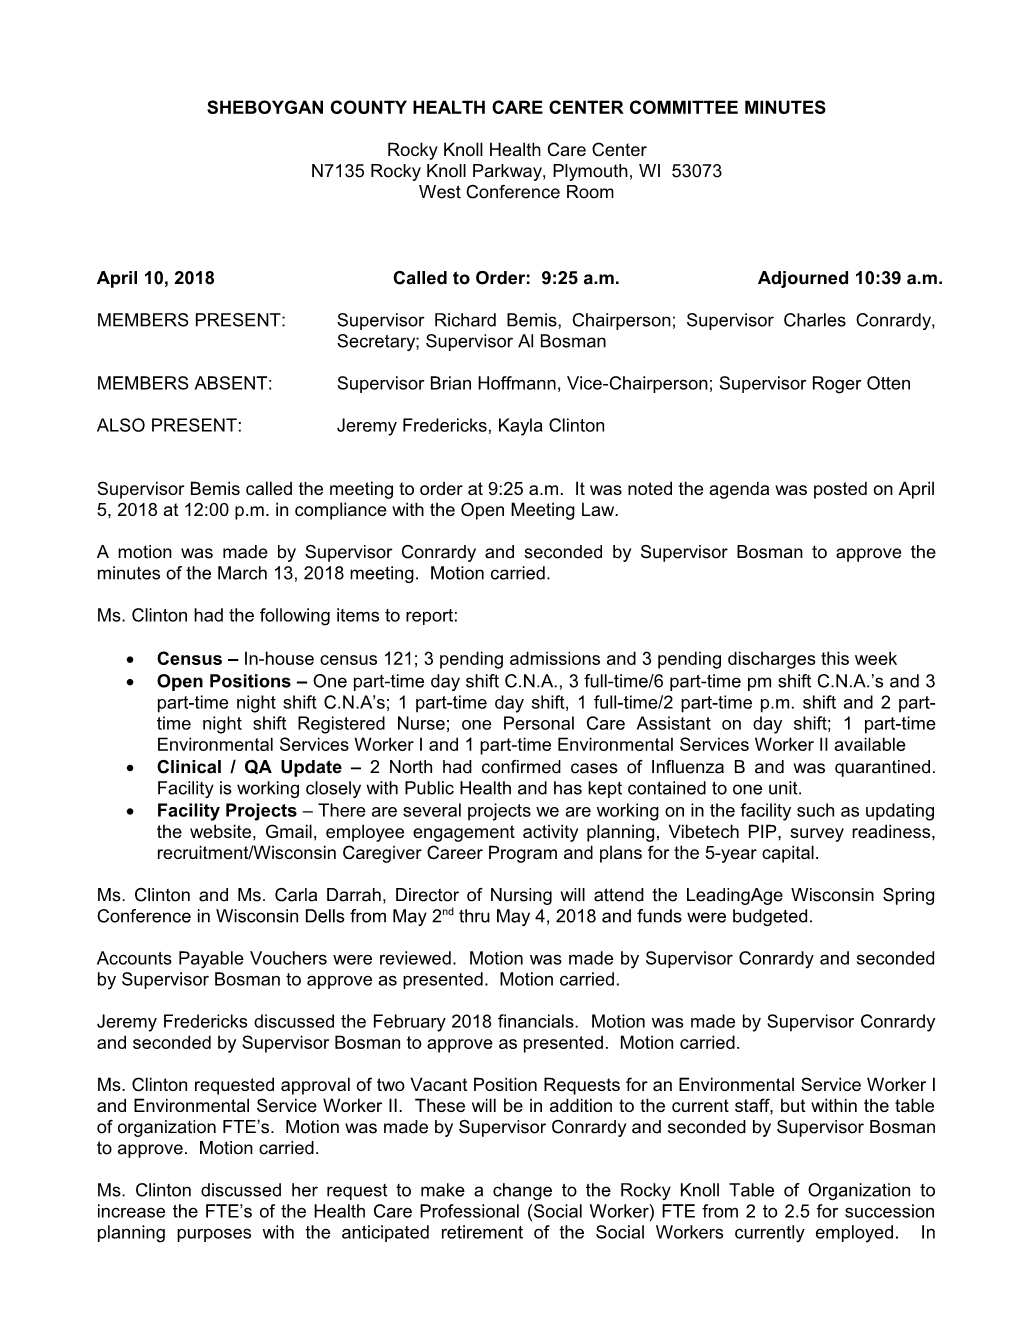 Sheboygan County Health Care Center Committee Minutes